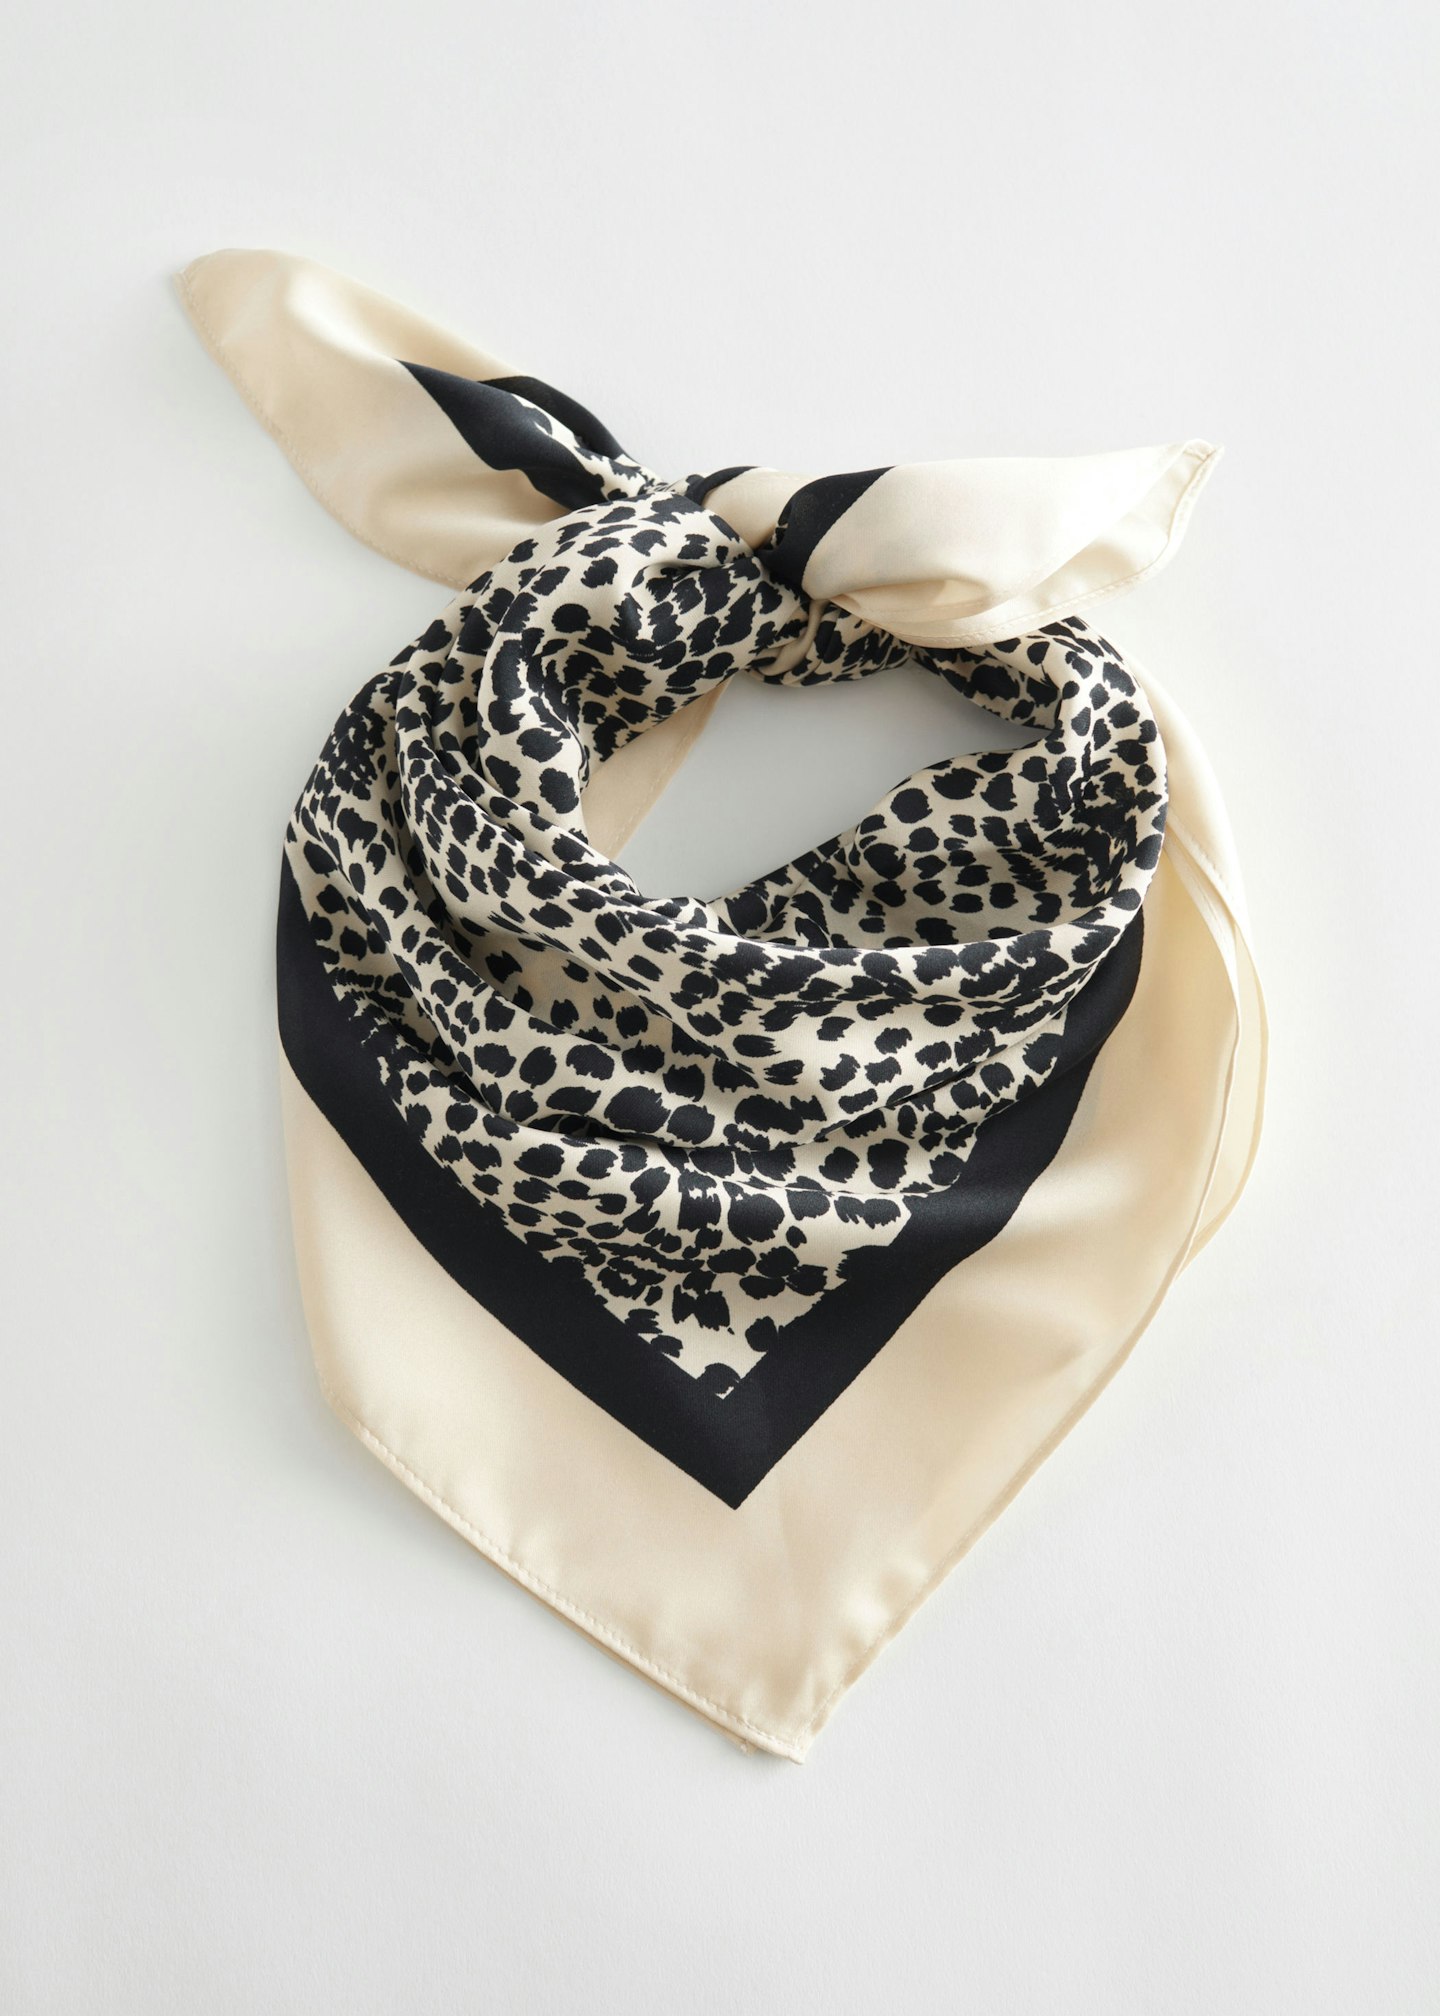 & Other Stories, Glossy Leopard-Print Scarf, £27